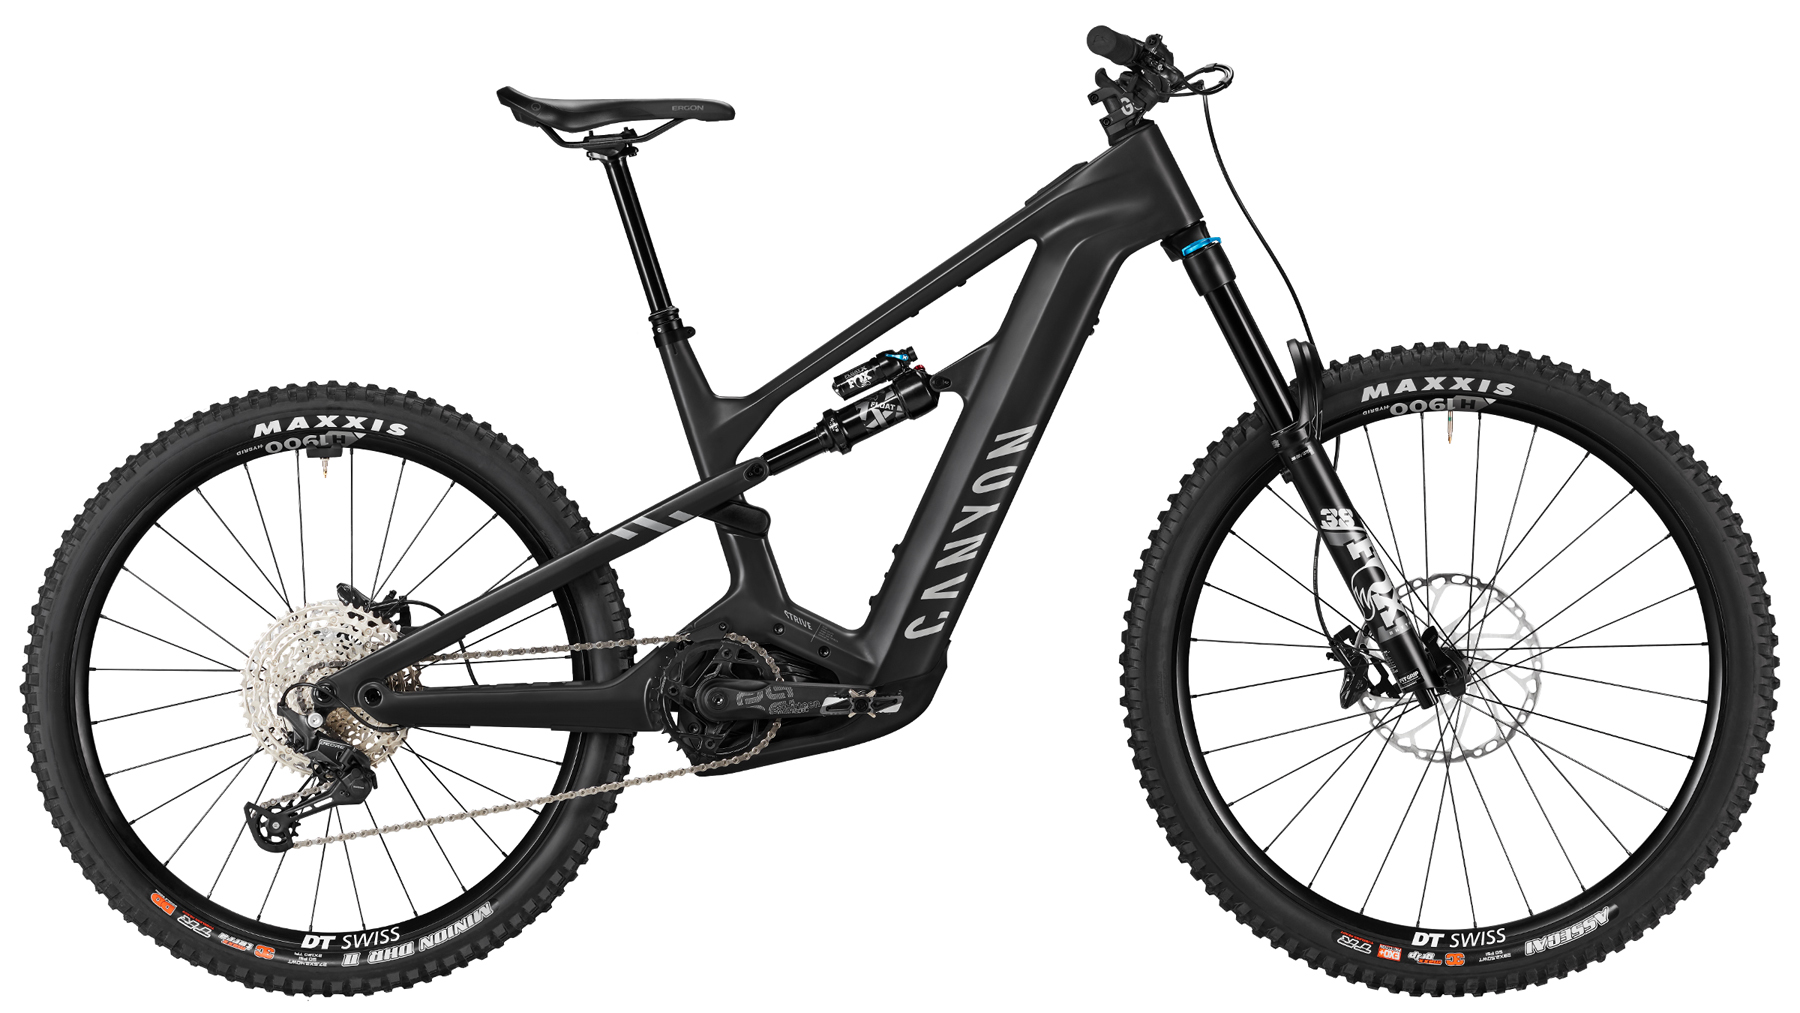 Simon Stewart reviews the Canyon Strive:ON for Blister